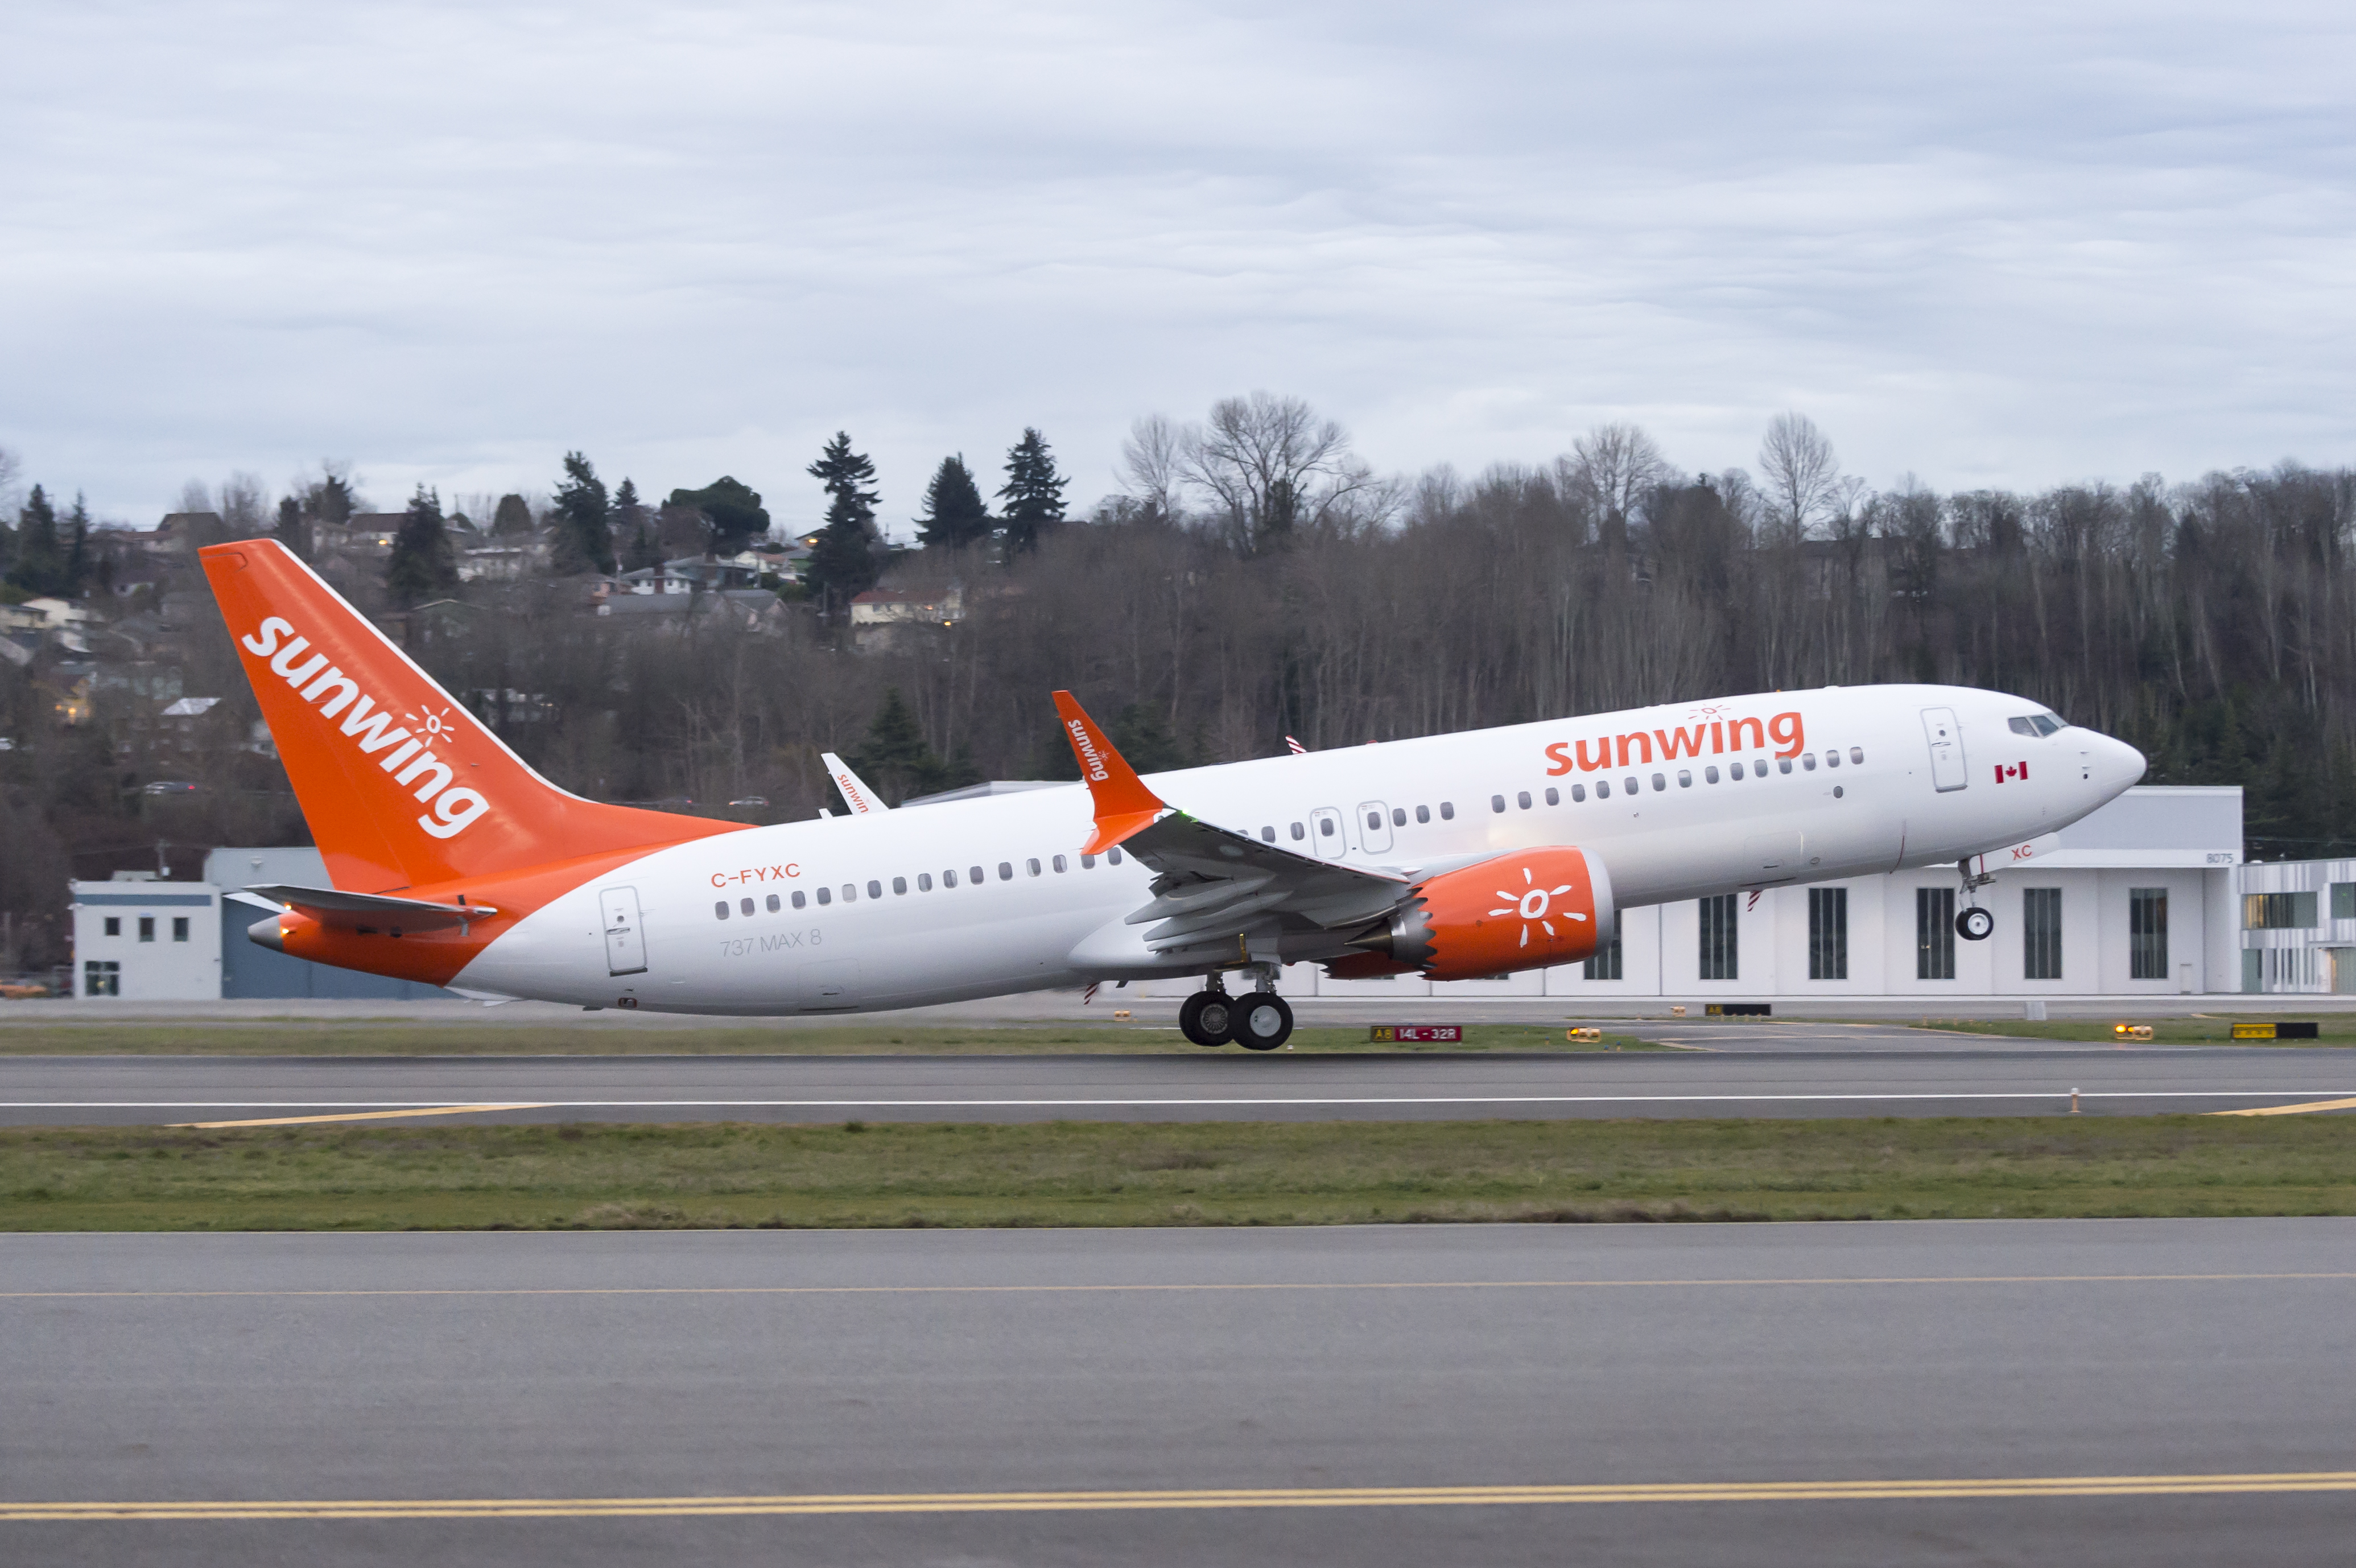 Sunwing 737 MAX 8 Delivery & Flyaway - January 31, 2019